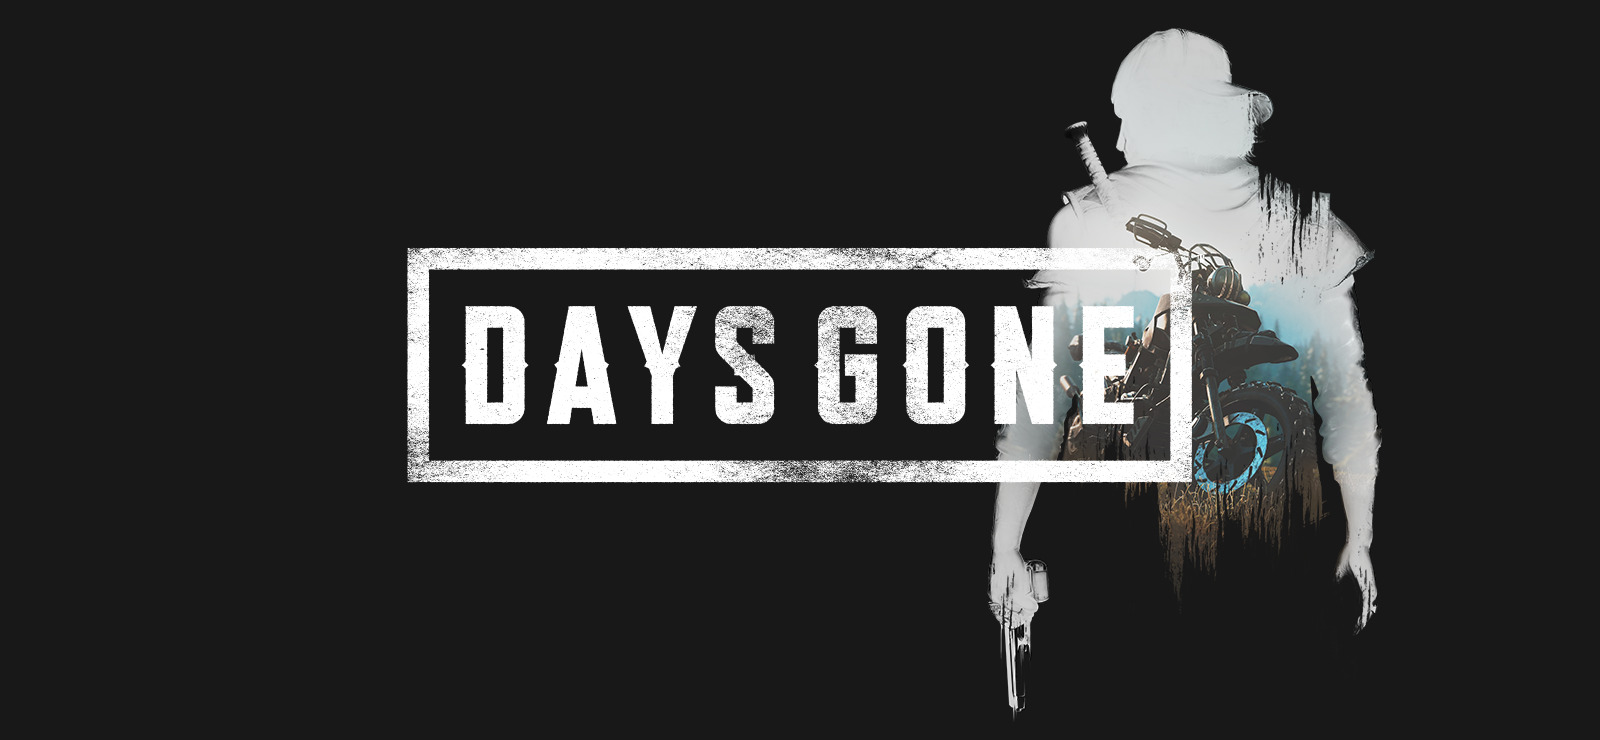 Days Gone Studio Confirms New Open-World Game With Multiplayer